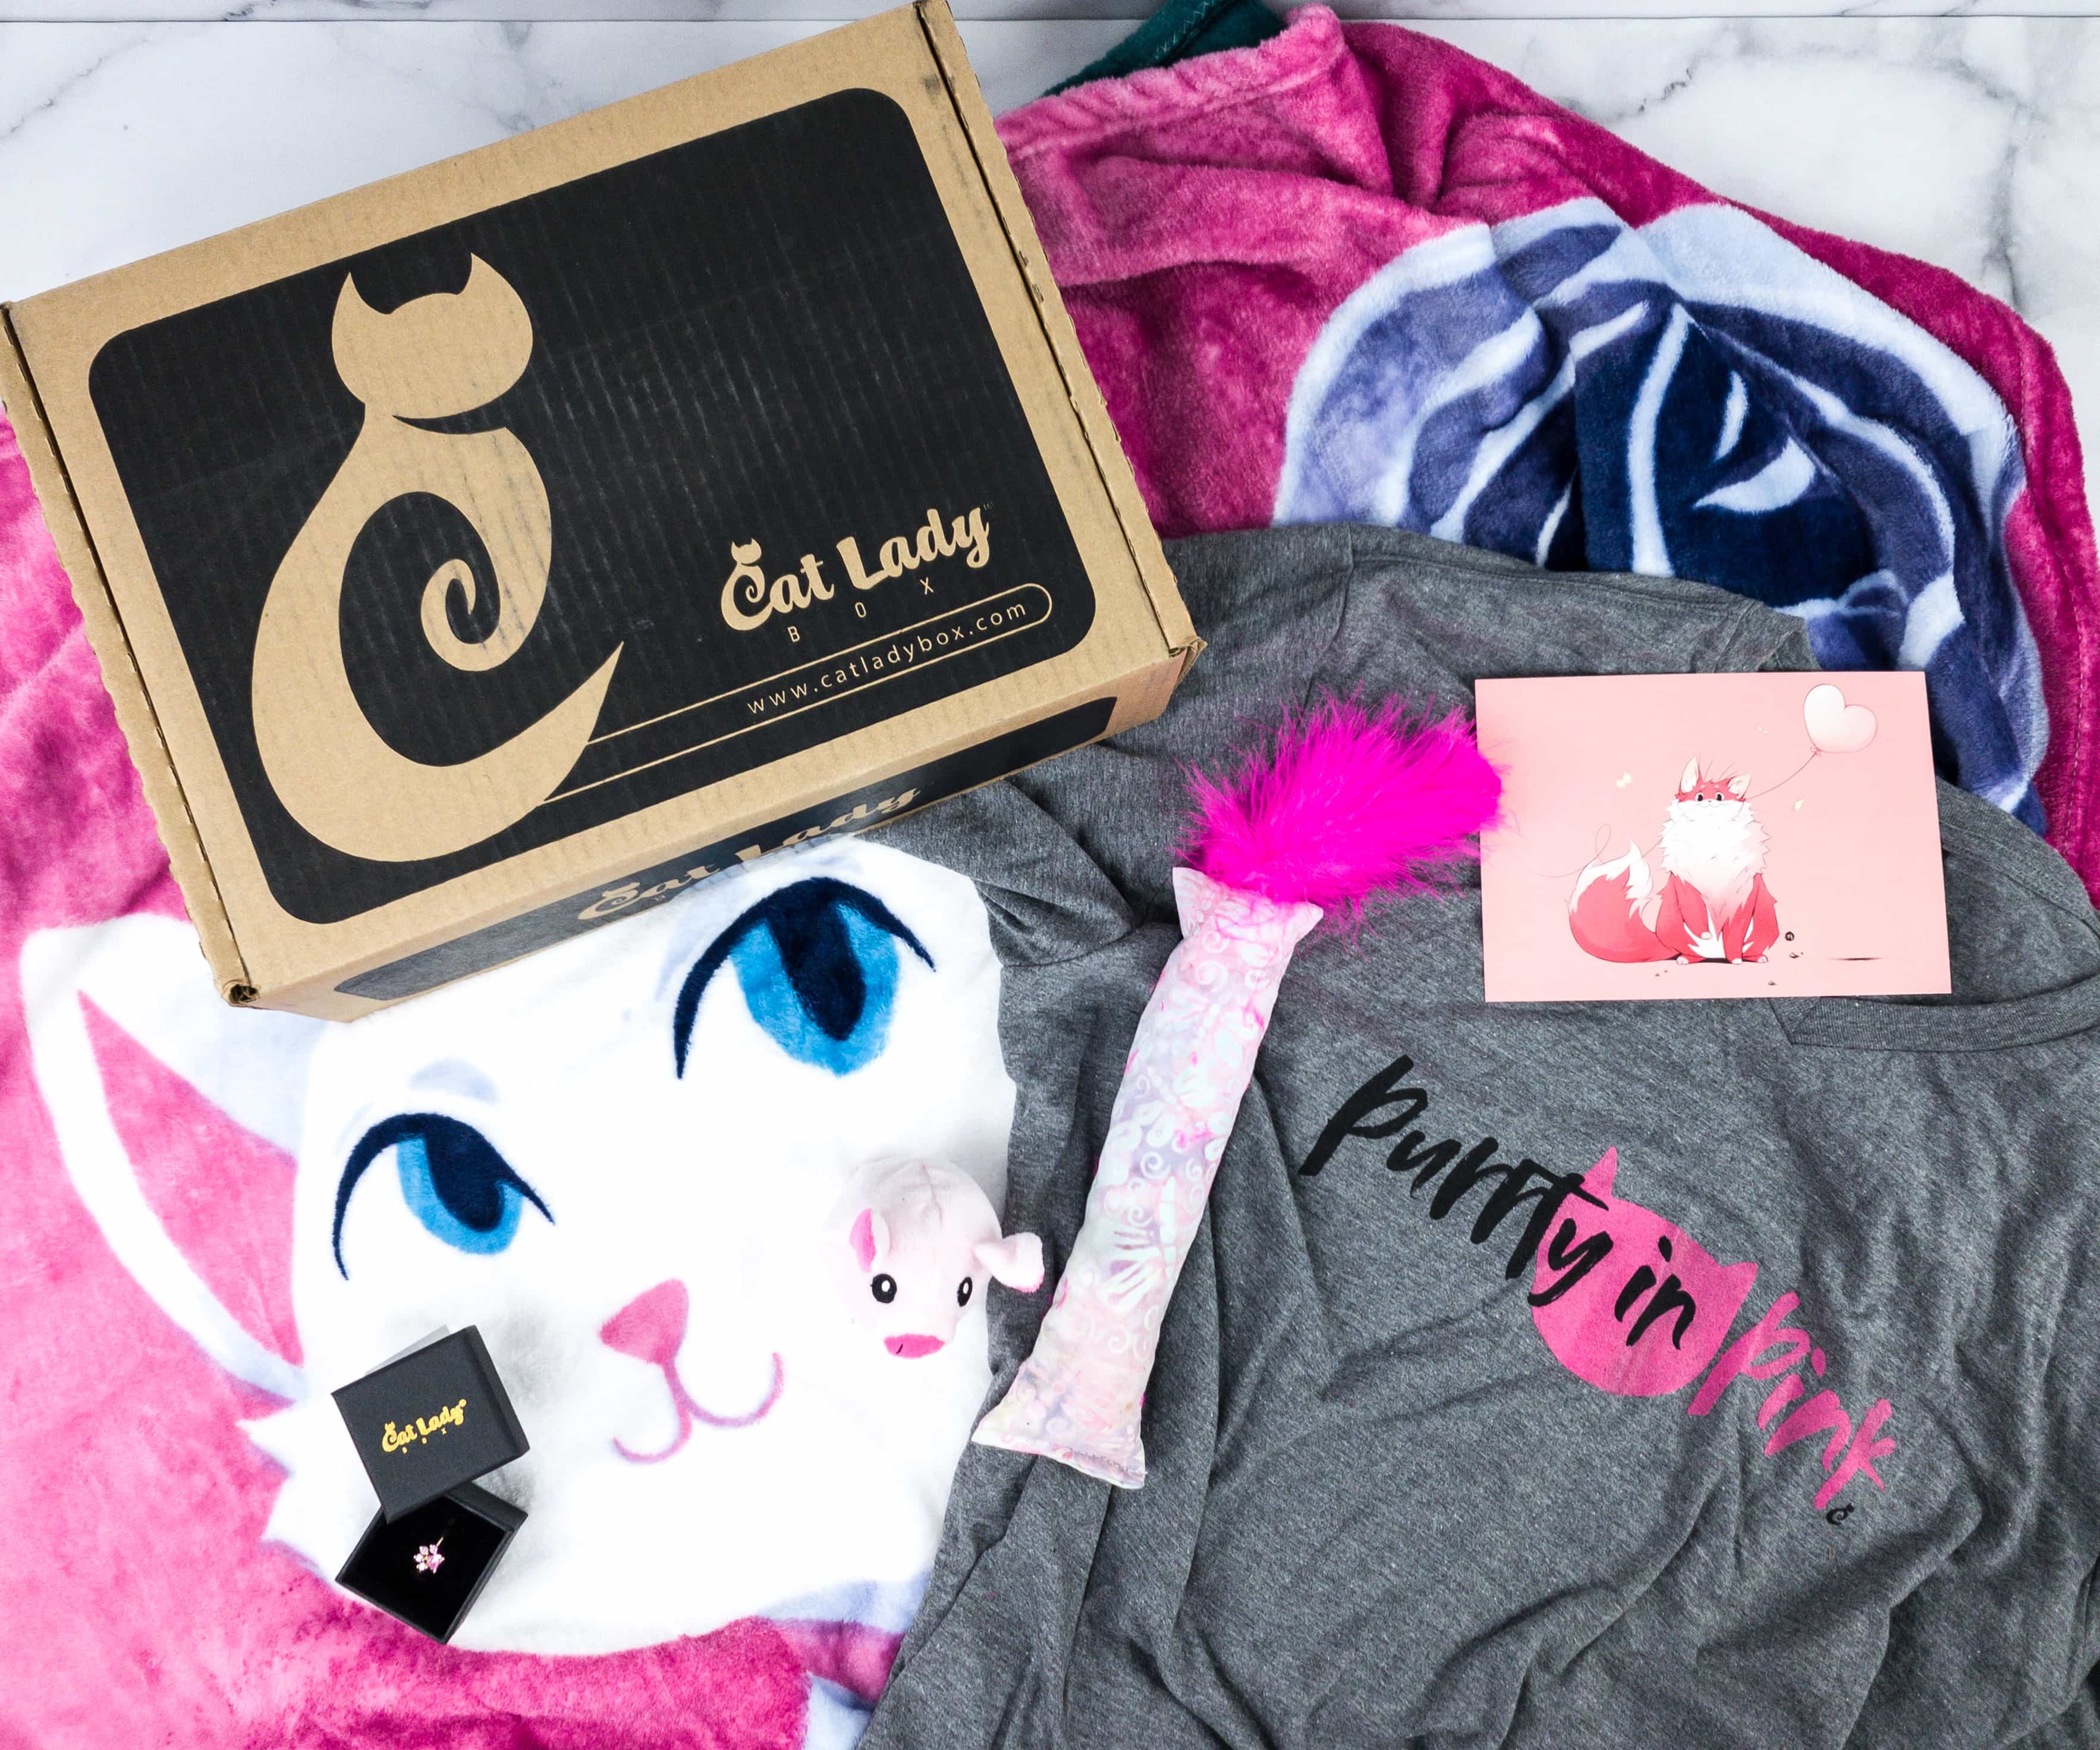 Cat Lady Box February Subscription Box Review Hello Subscription